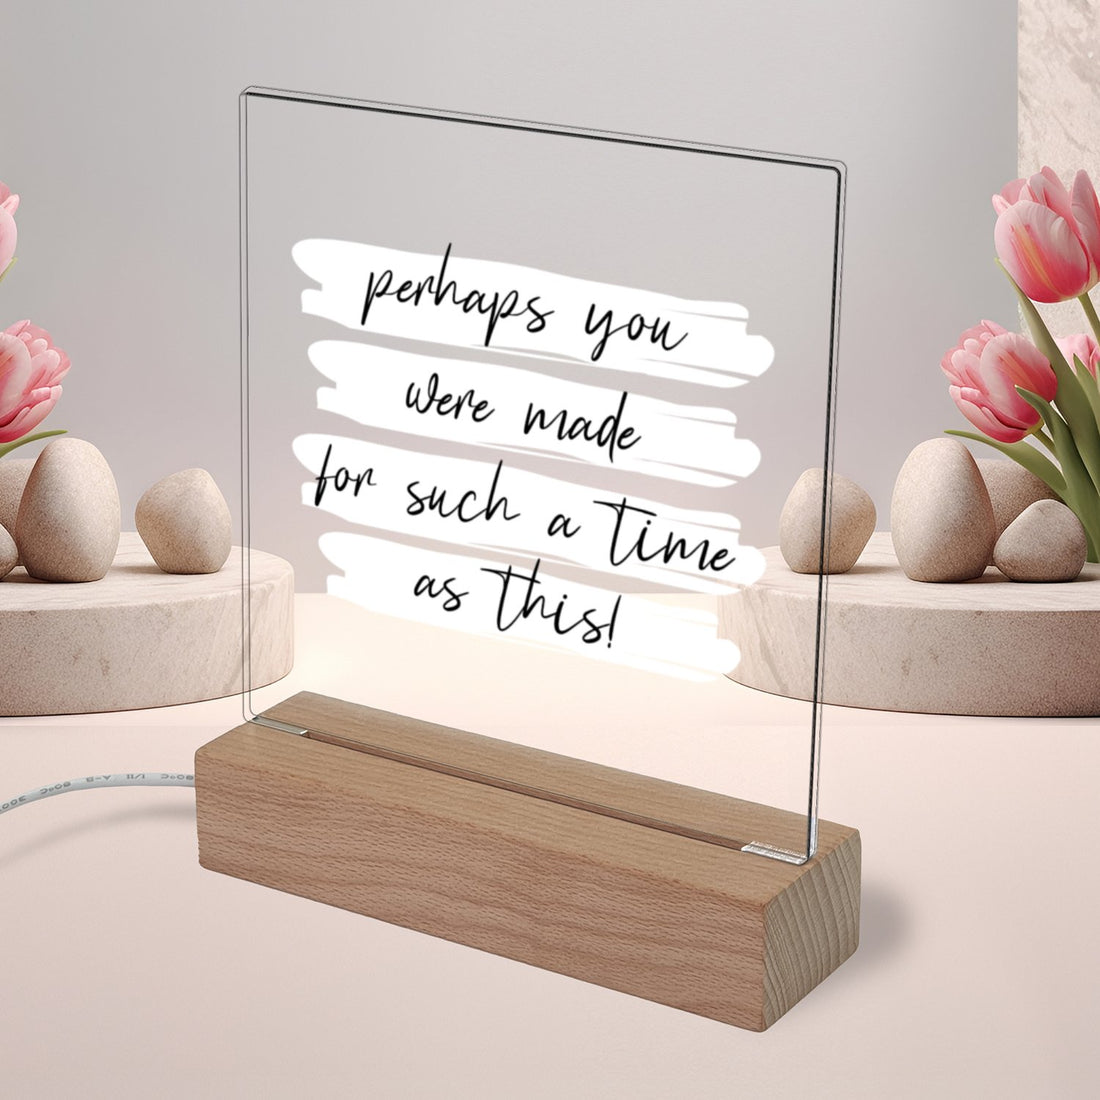 Perhaps You Were Made For This Plaque - Positively Sassy - Perhaps You Were Made For This Plaque